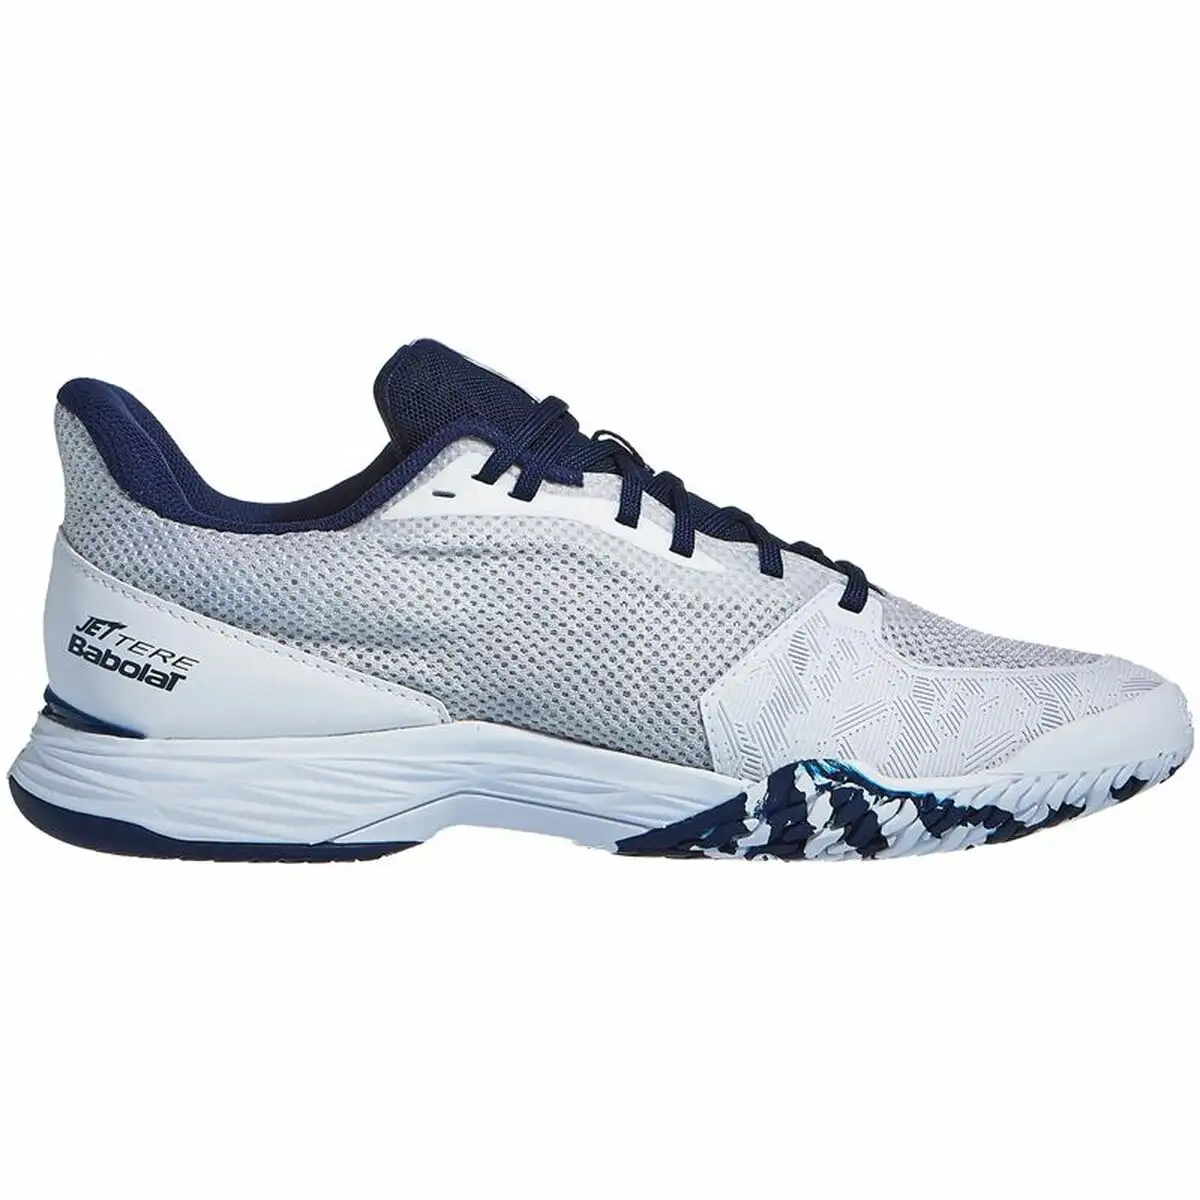 Chaussures tennis babolat homme